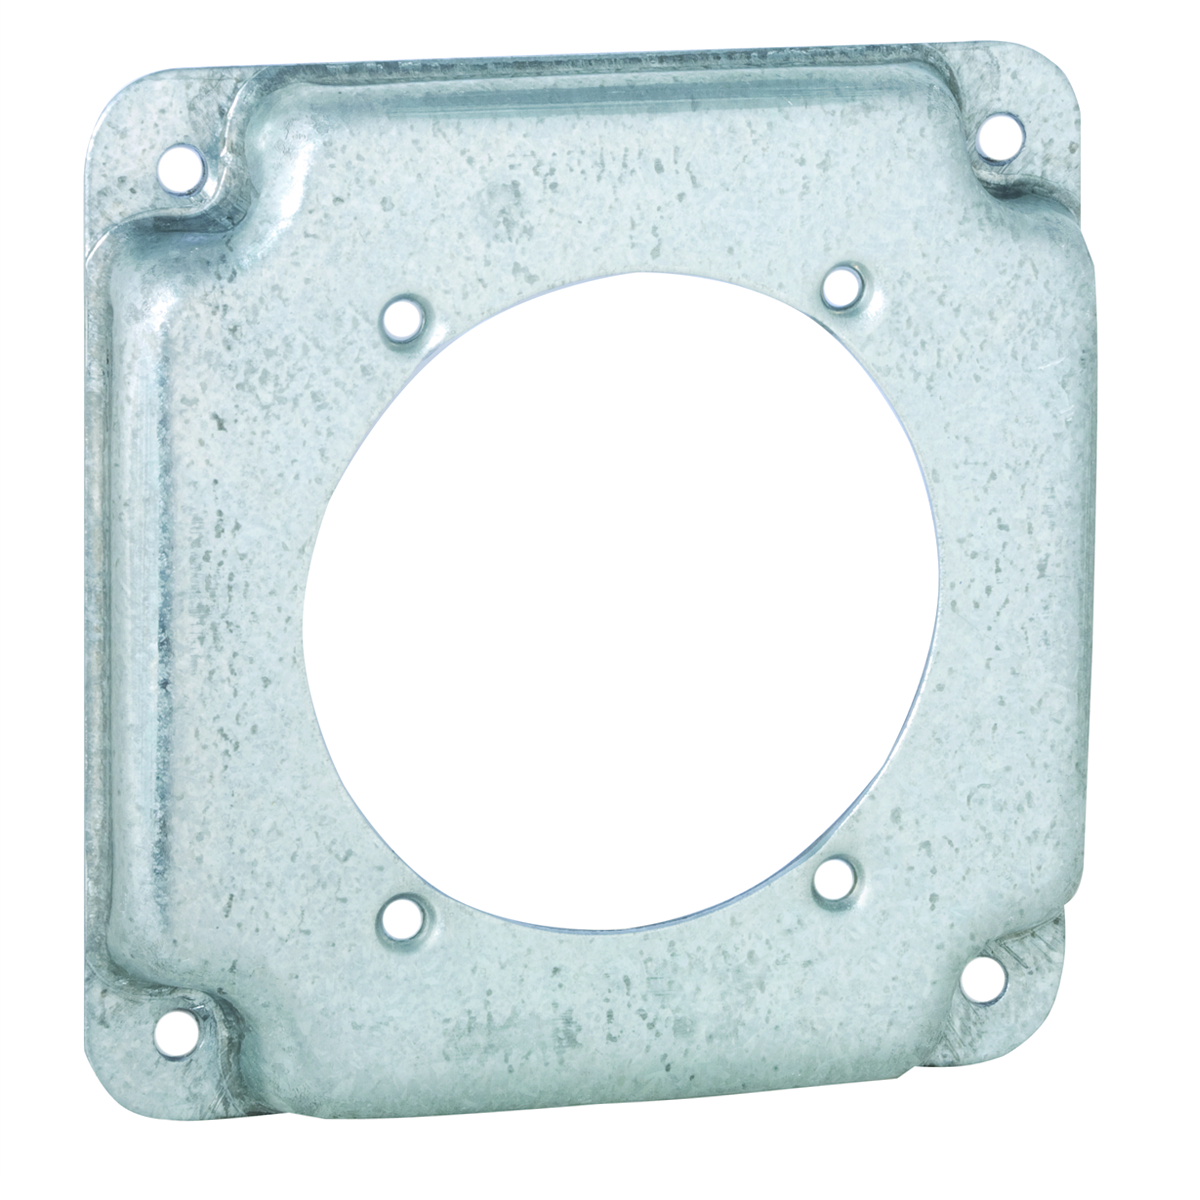 RACO 813C 4" SQUARE EXPOSED WORK COVER, 30A-60A RECEPTACLE 2.625" DIAM